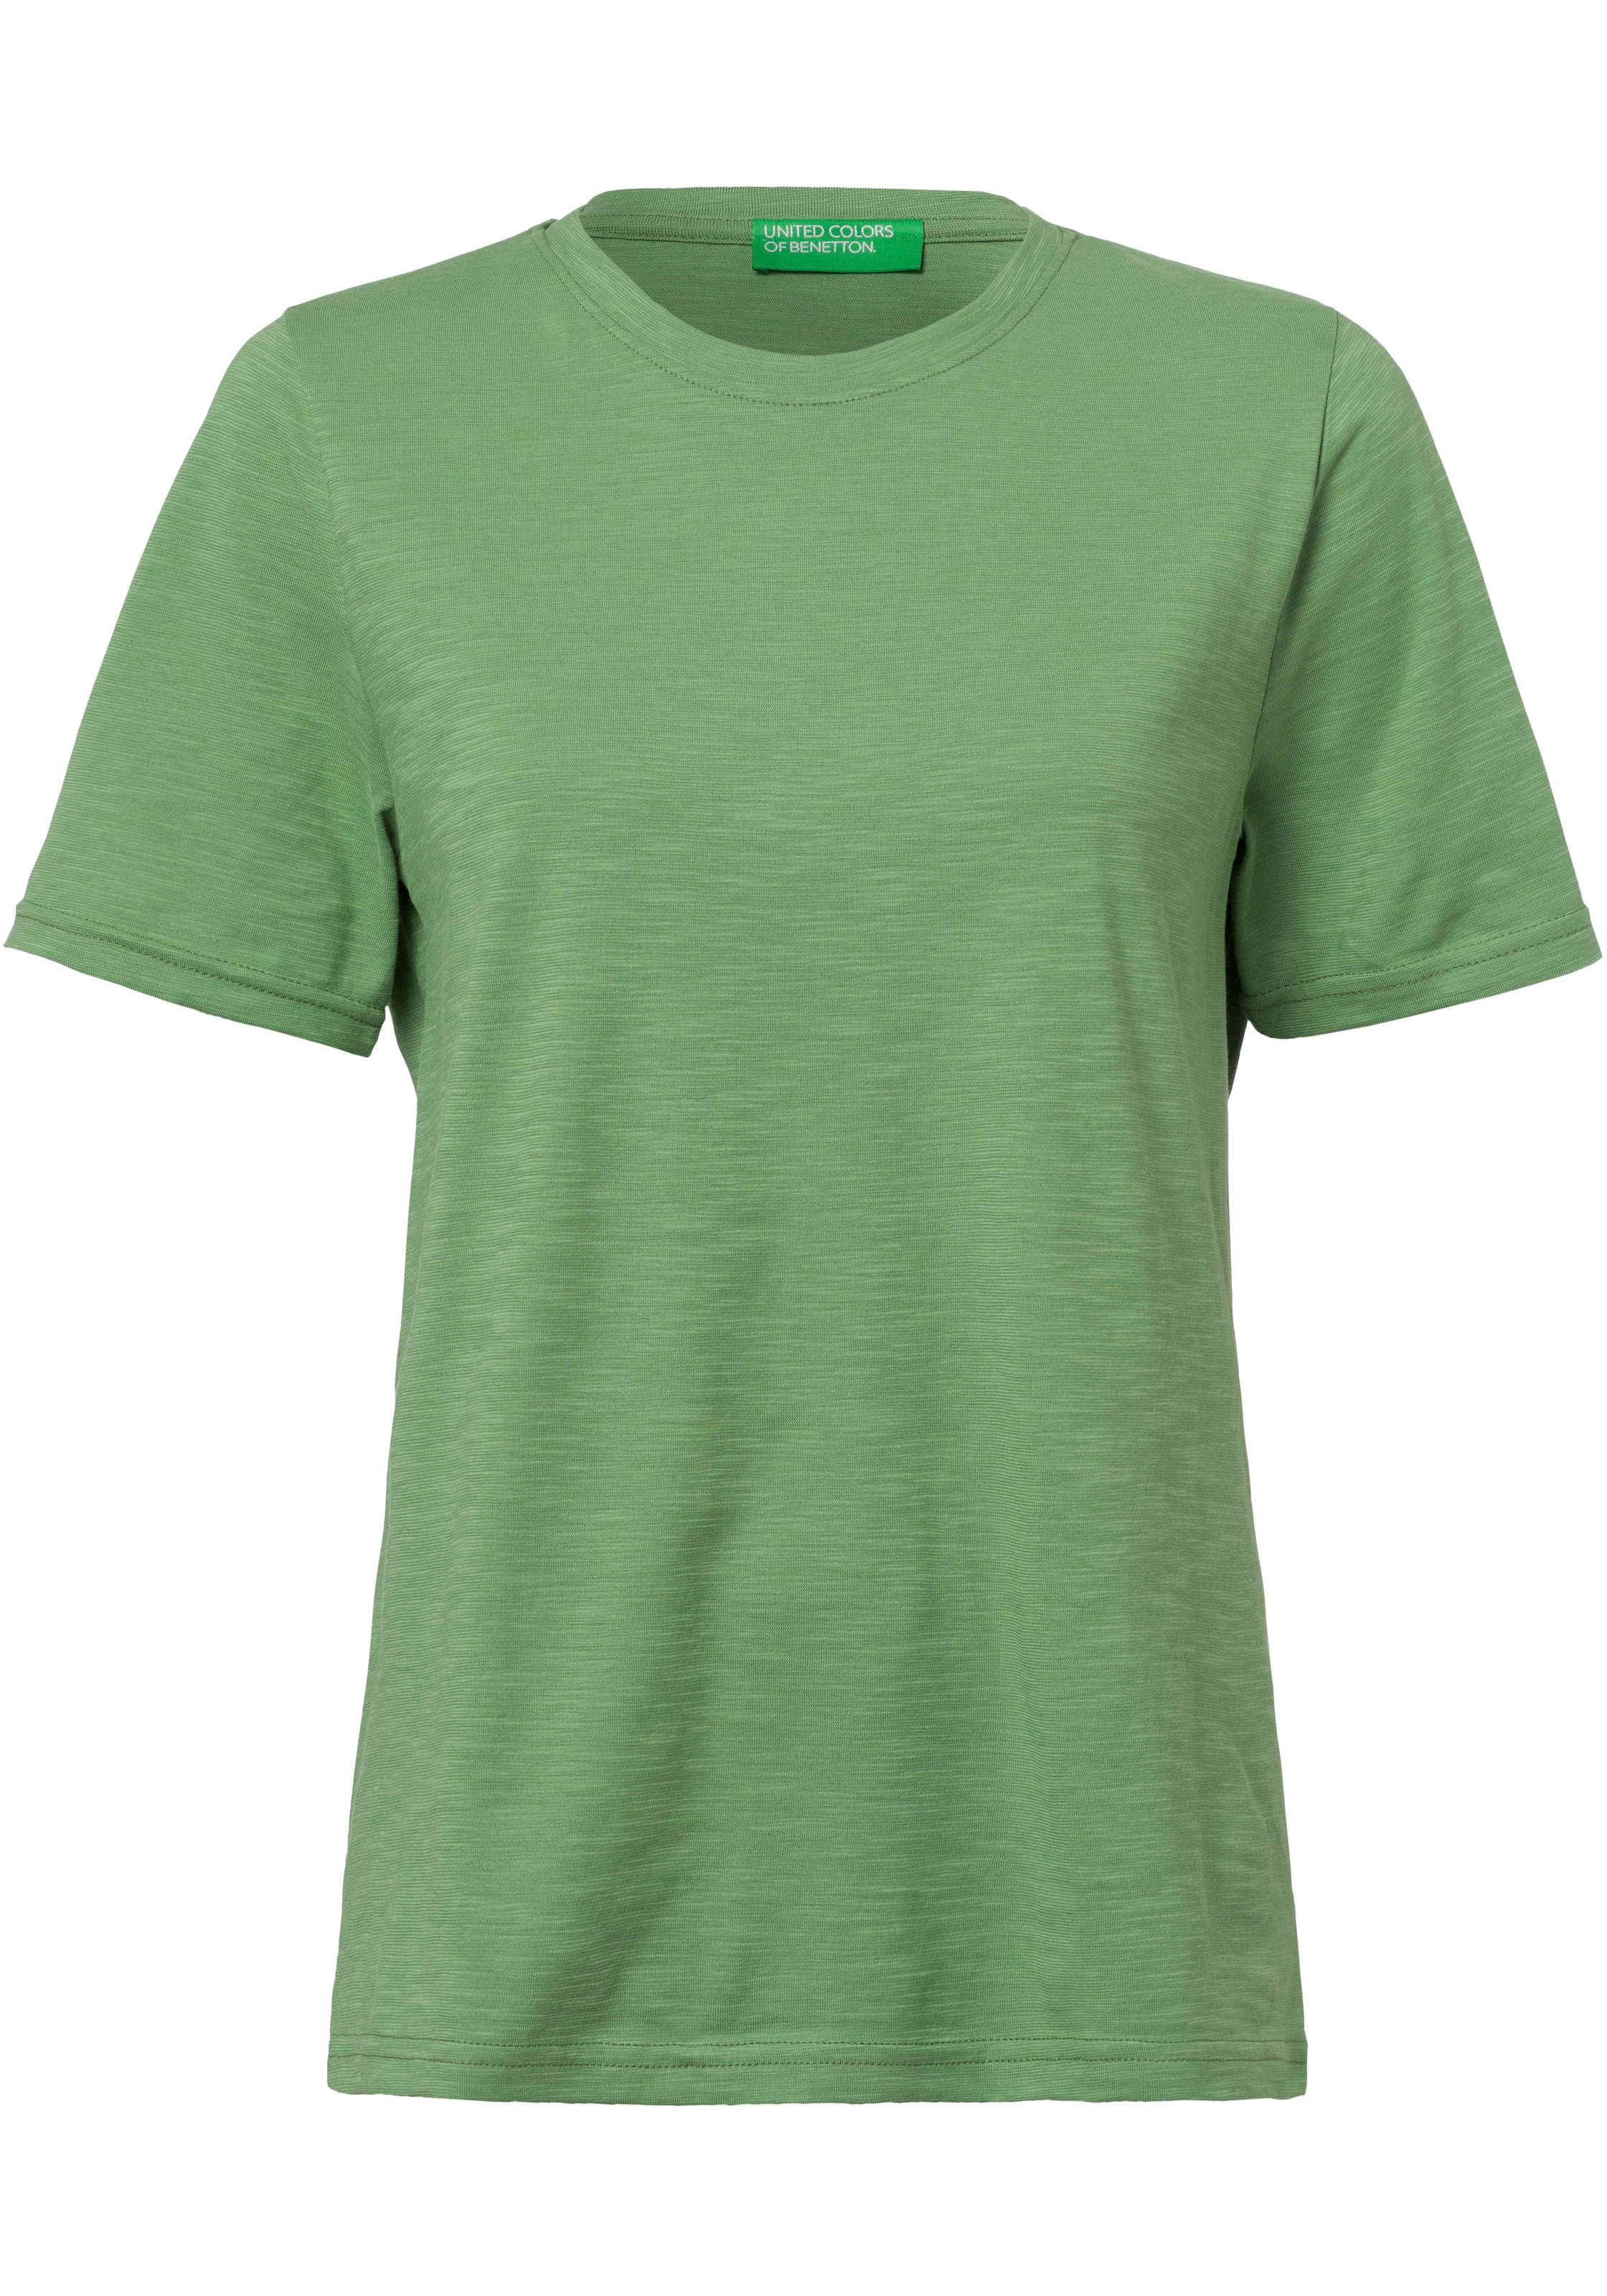 in Colors cleaner of Basic-Optik bei Benetton T-Shirt, ♕ United